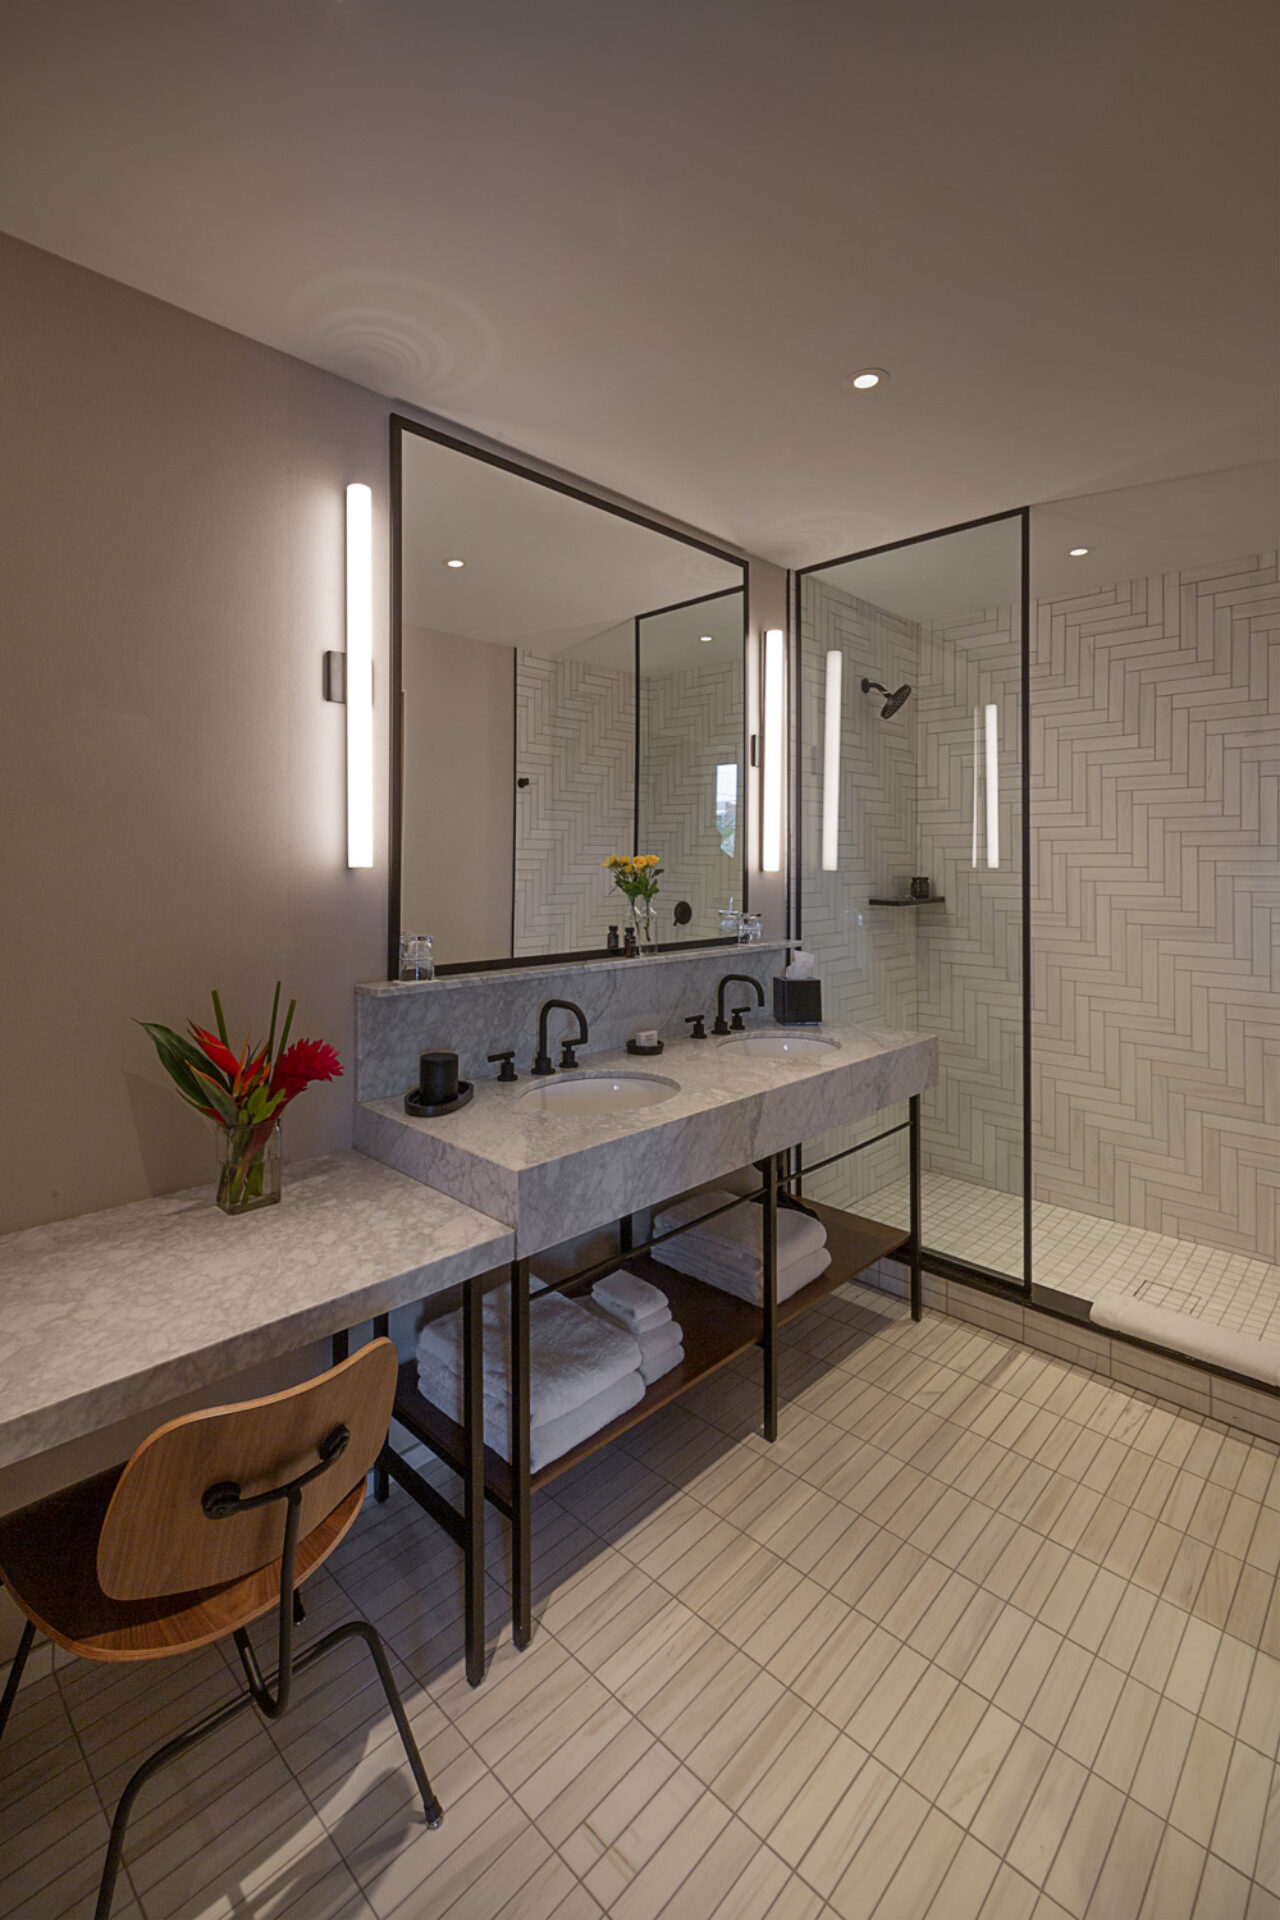 Seating, double vanity, and large glass shower at our hotel in Ybor City, FL